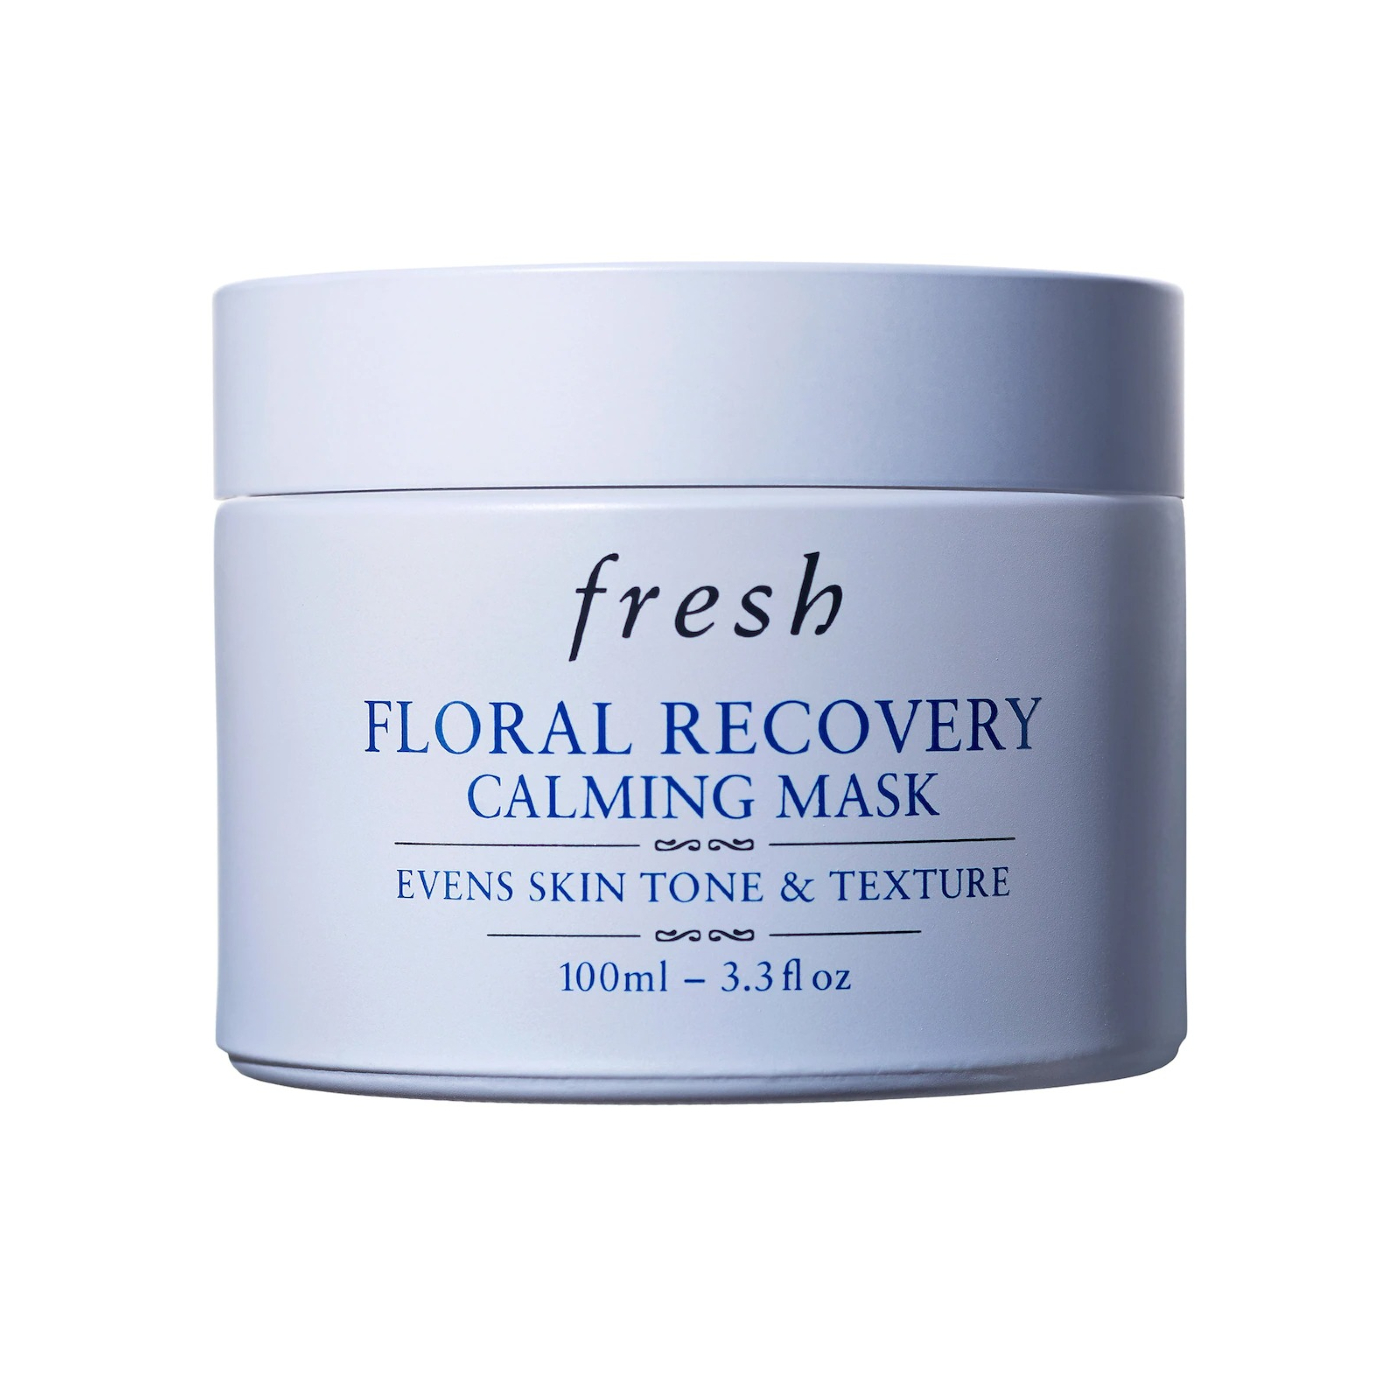 Fresh Floral Recovery Calming Mask